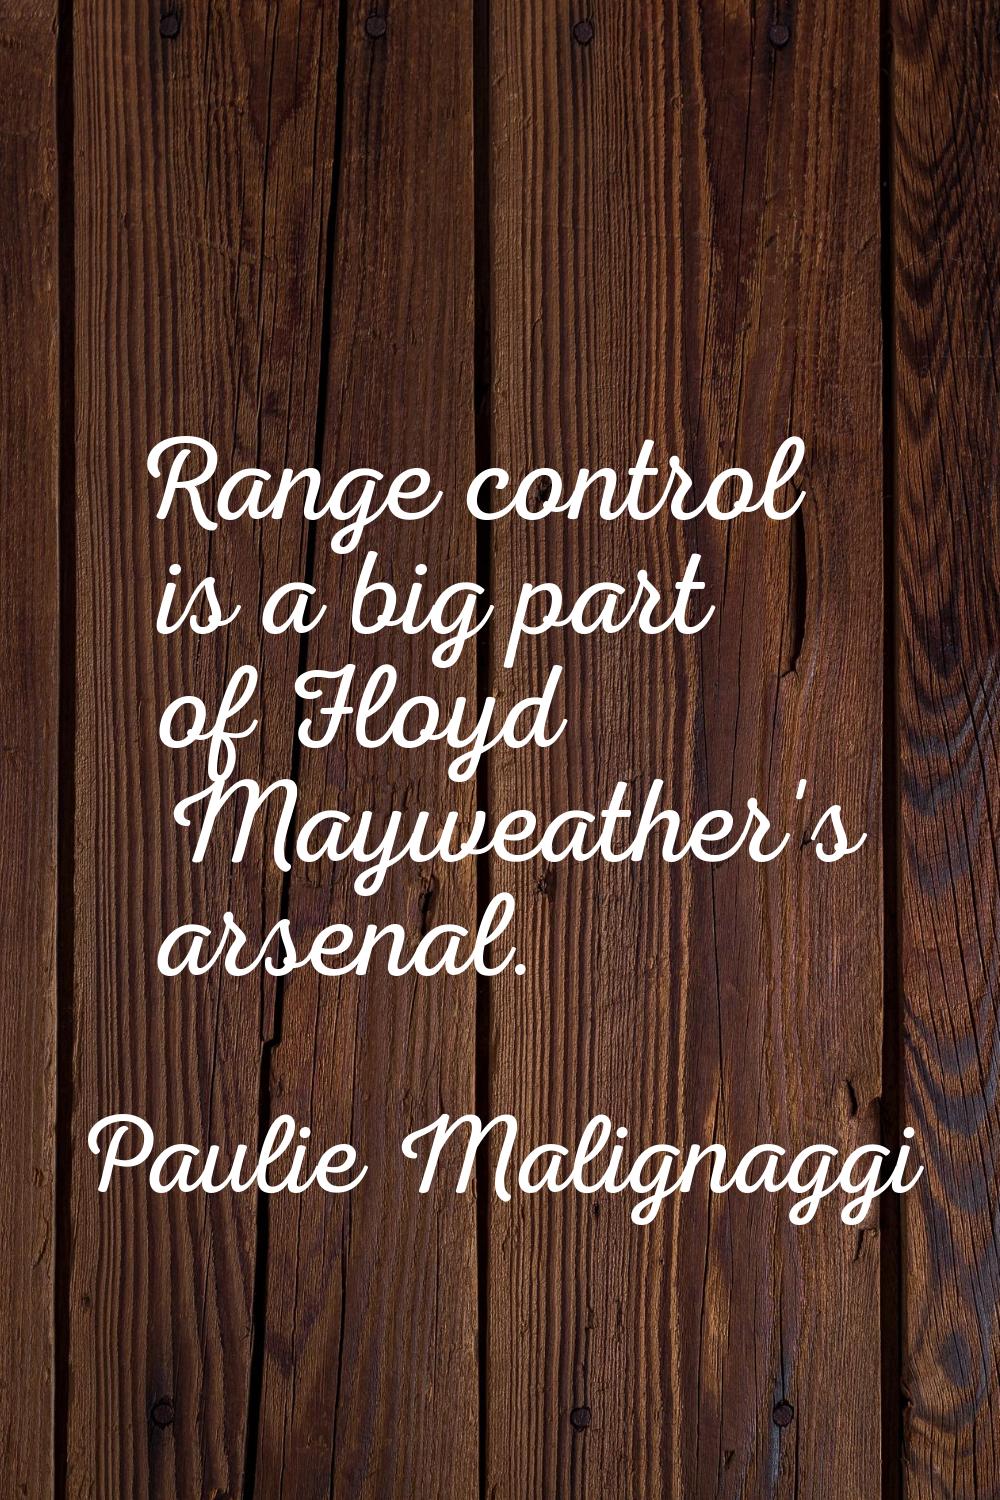 Range control is a big part of Floyd Mayweather's arsenal.